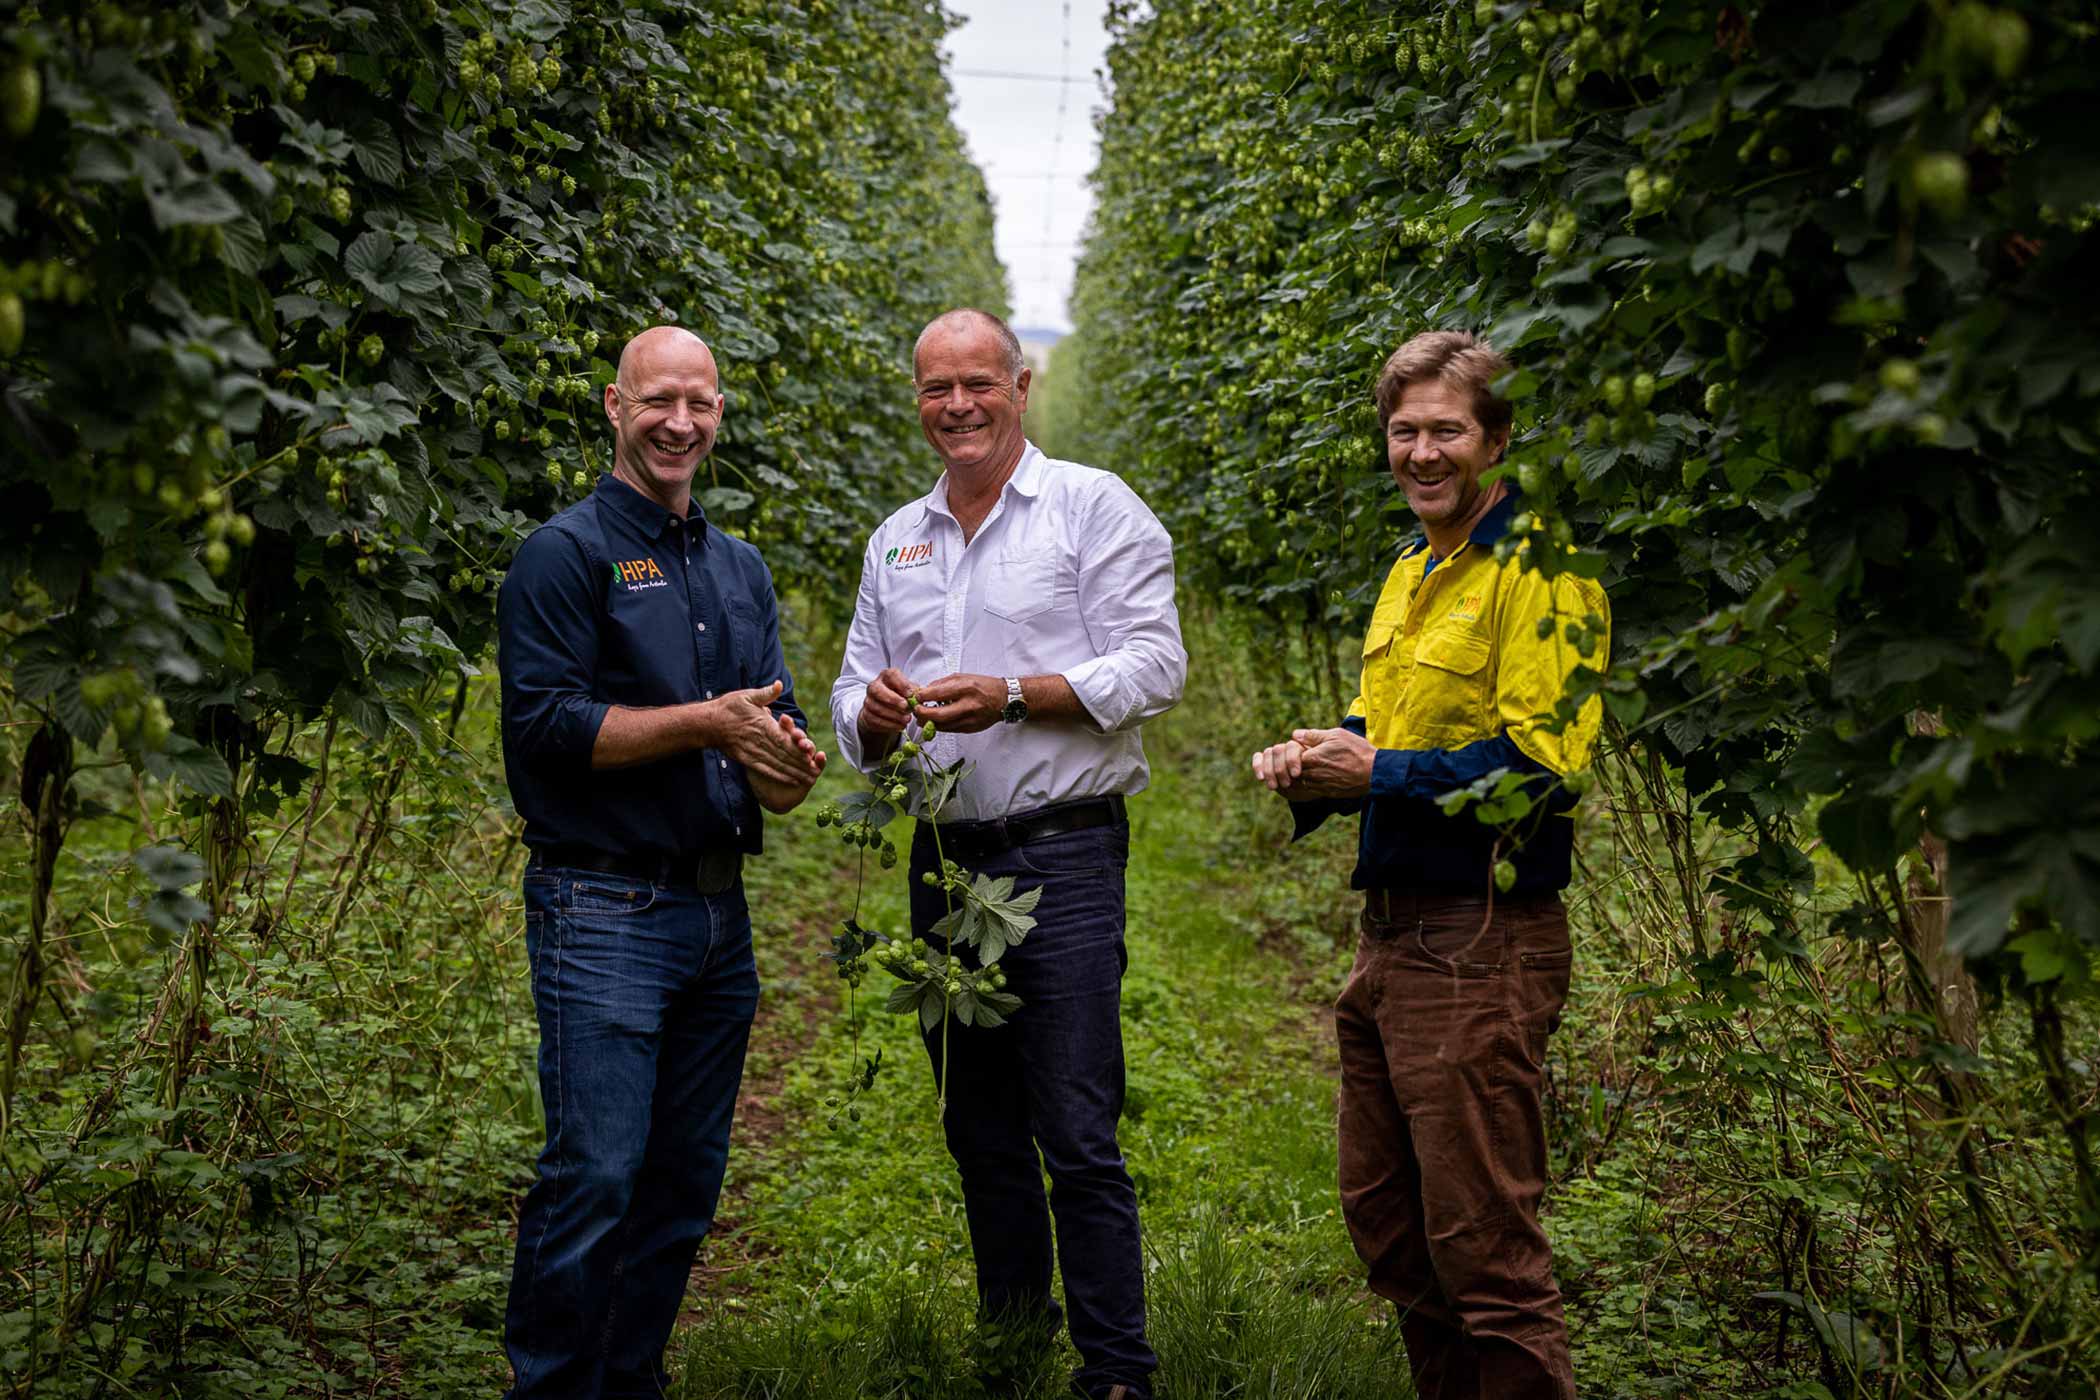 Top 3 Awesome Australian Hops: Discover the Hops Reshaping Craft Beer